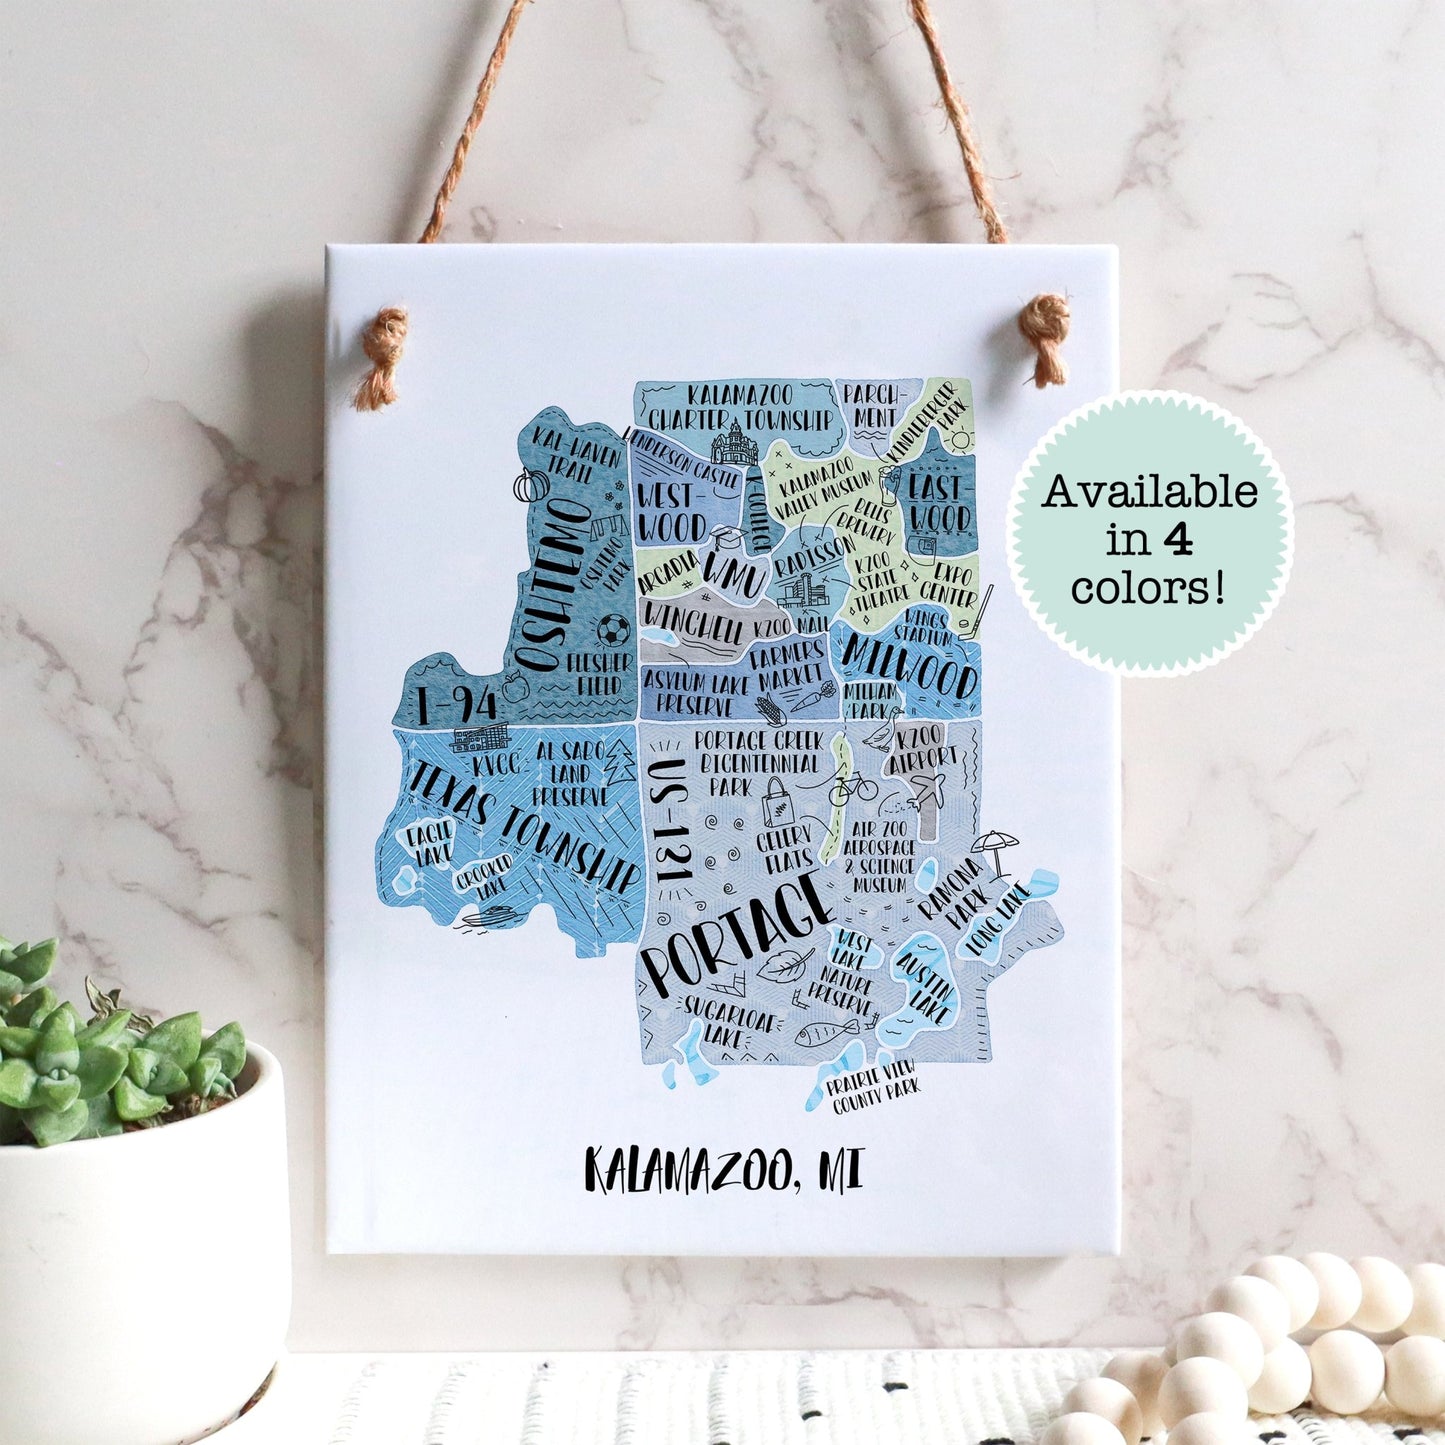 An illustrated map of Kalamazoo MI on a rectangle tile sign, hanging on a wall - in the color blue